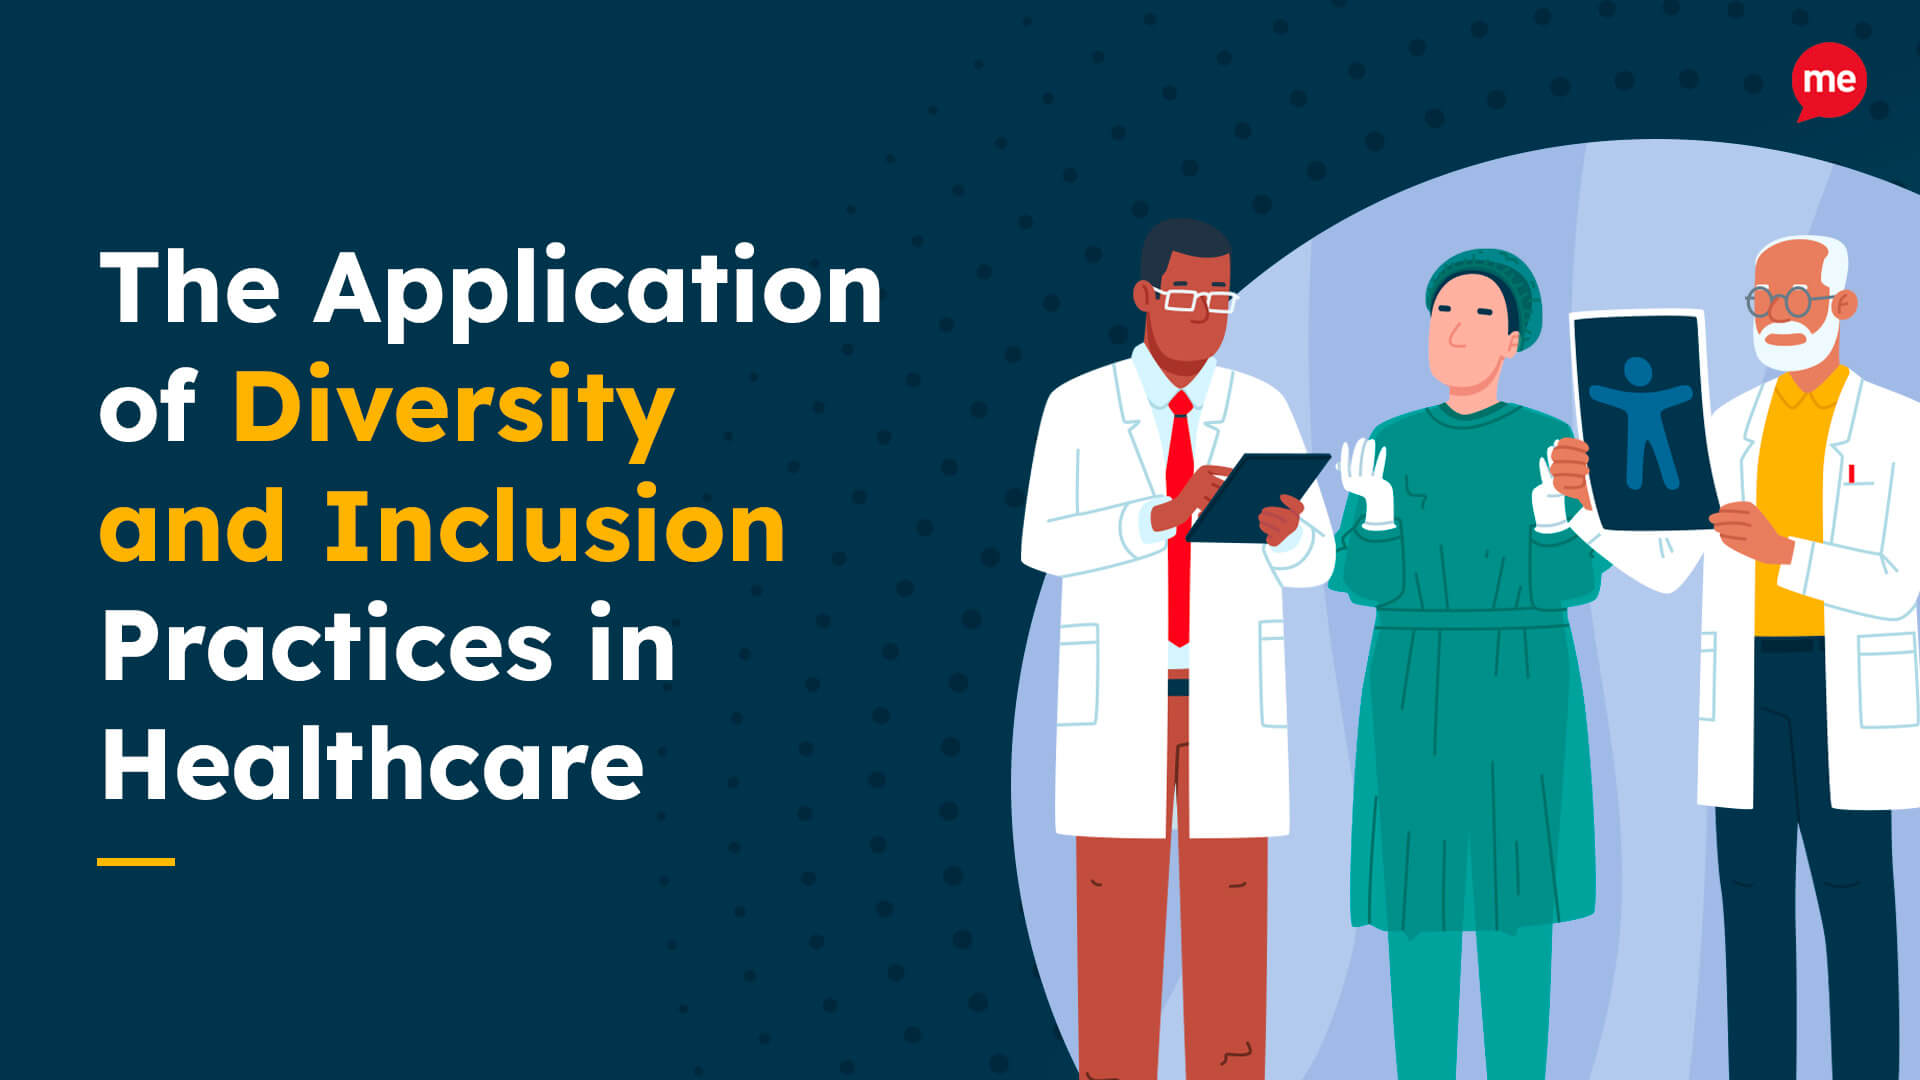 The Application of Diversity and Inclusion Practices in Healthcare